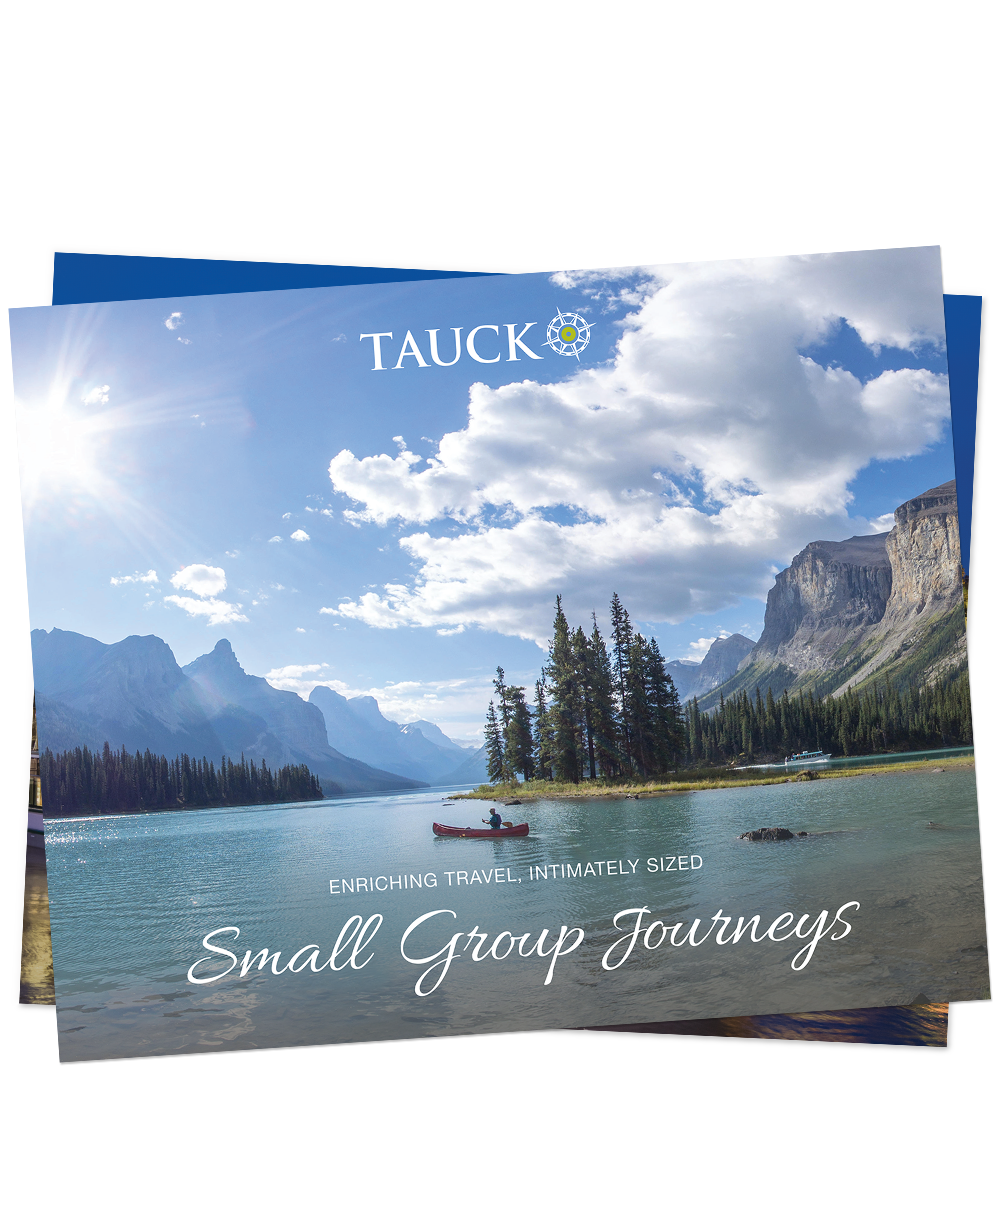 Small Group Tours Tauck Small Group Travel